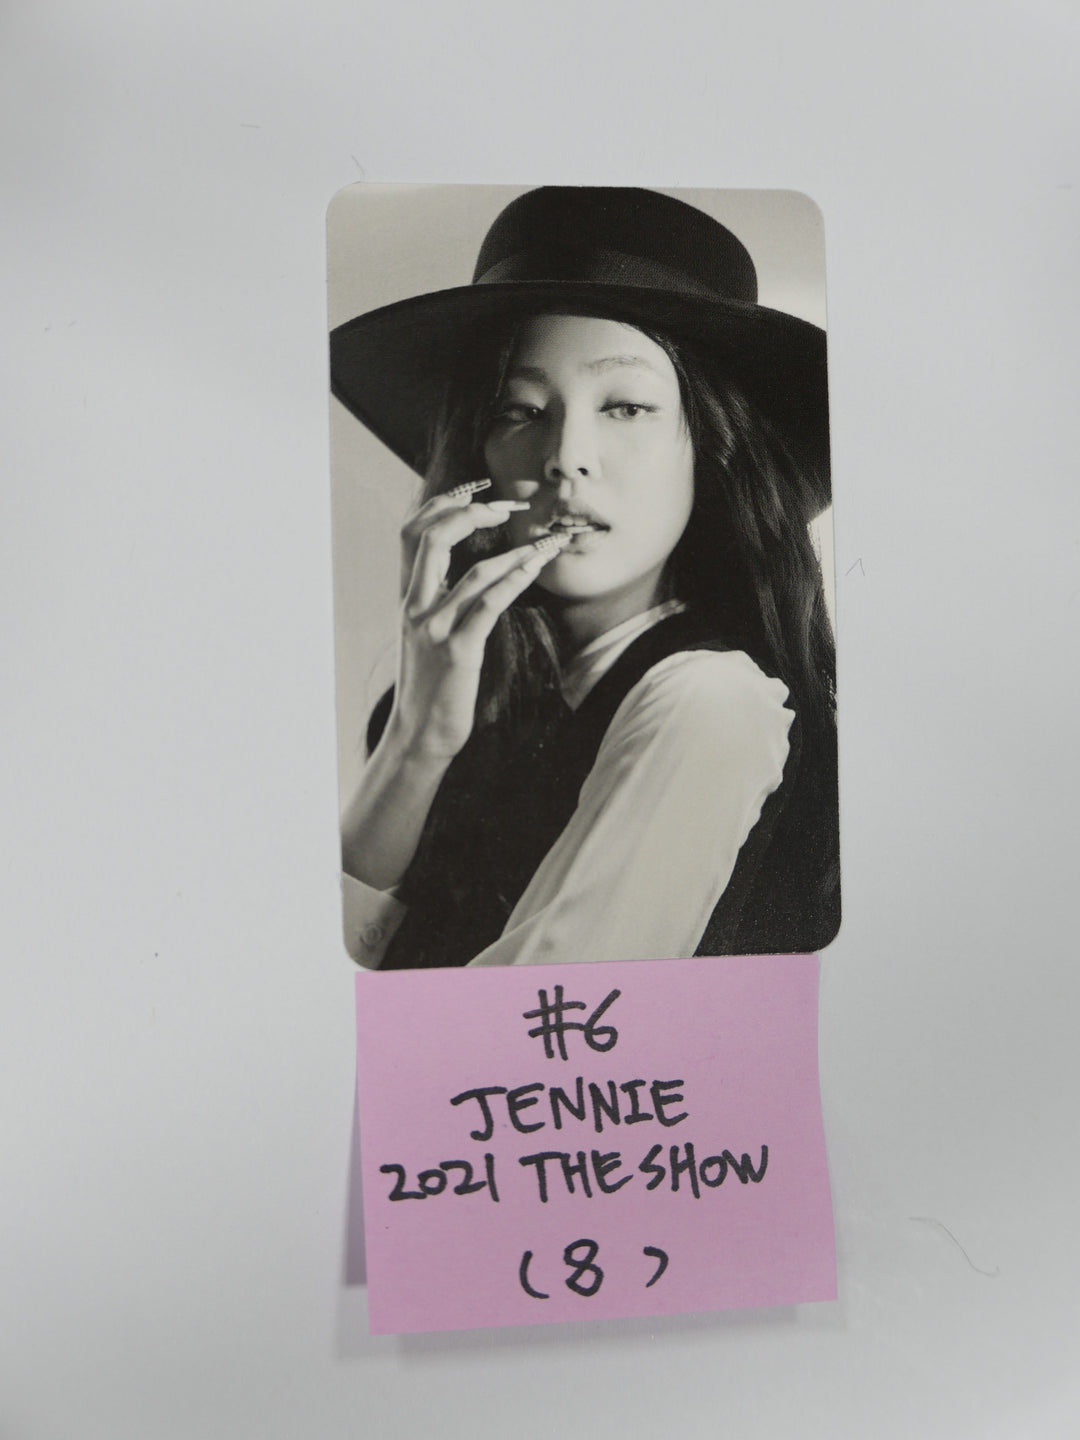 Blackpink "The Show" LIVE - Official Photocard